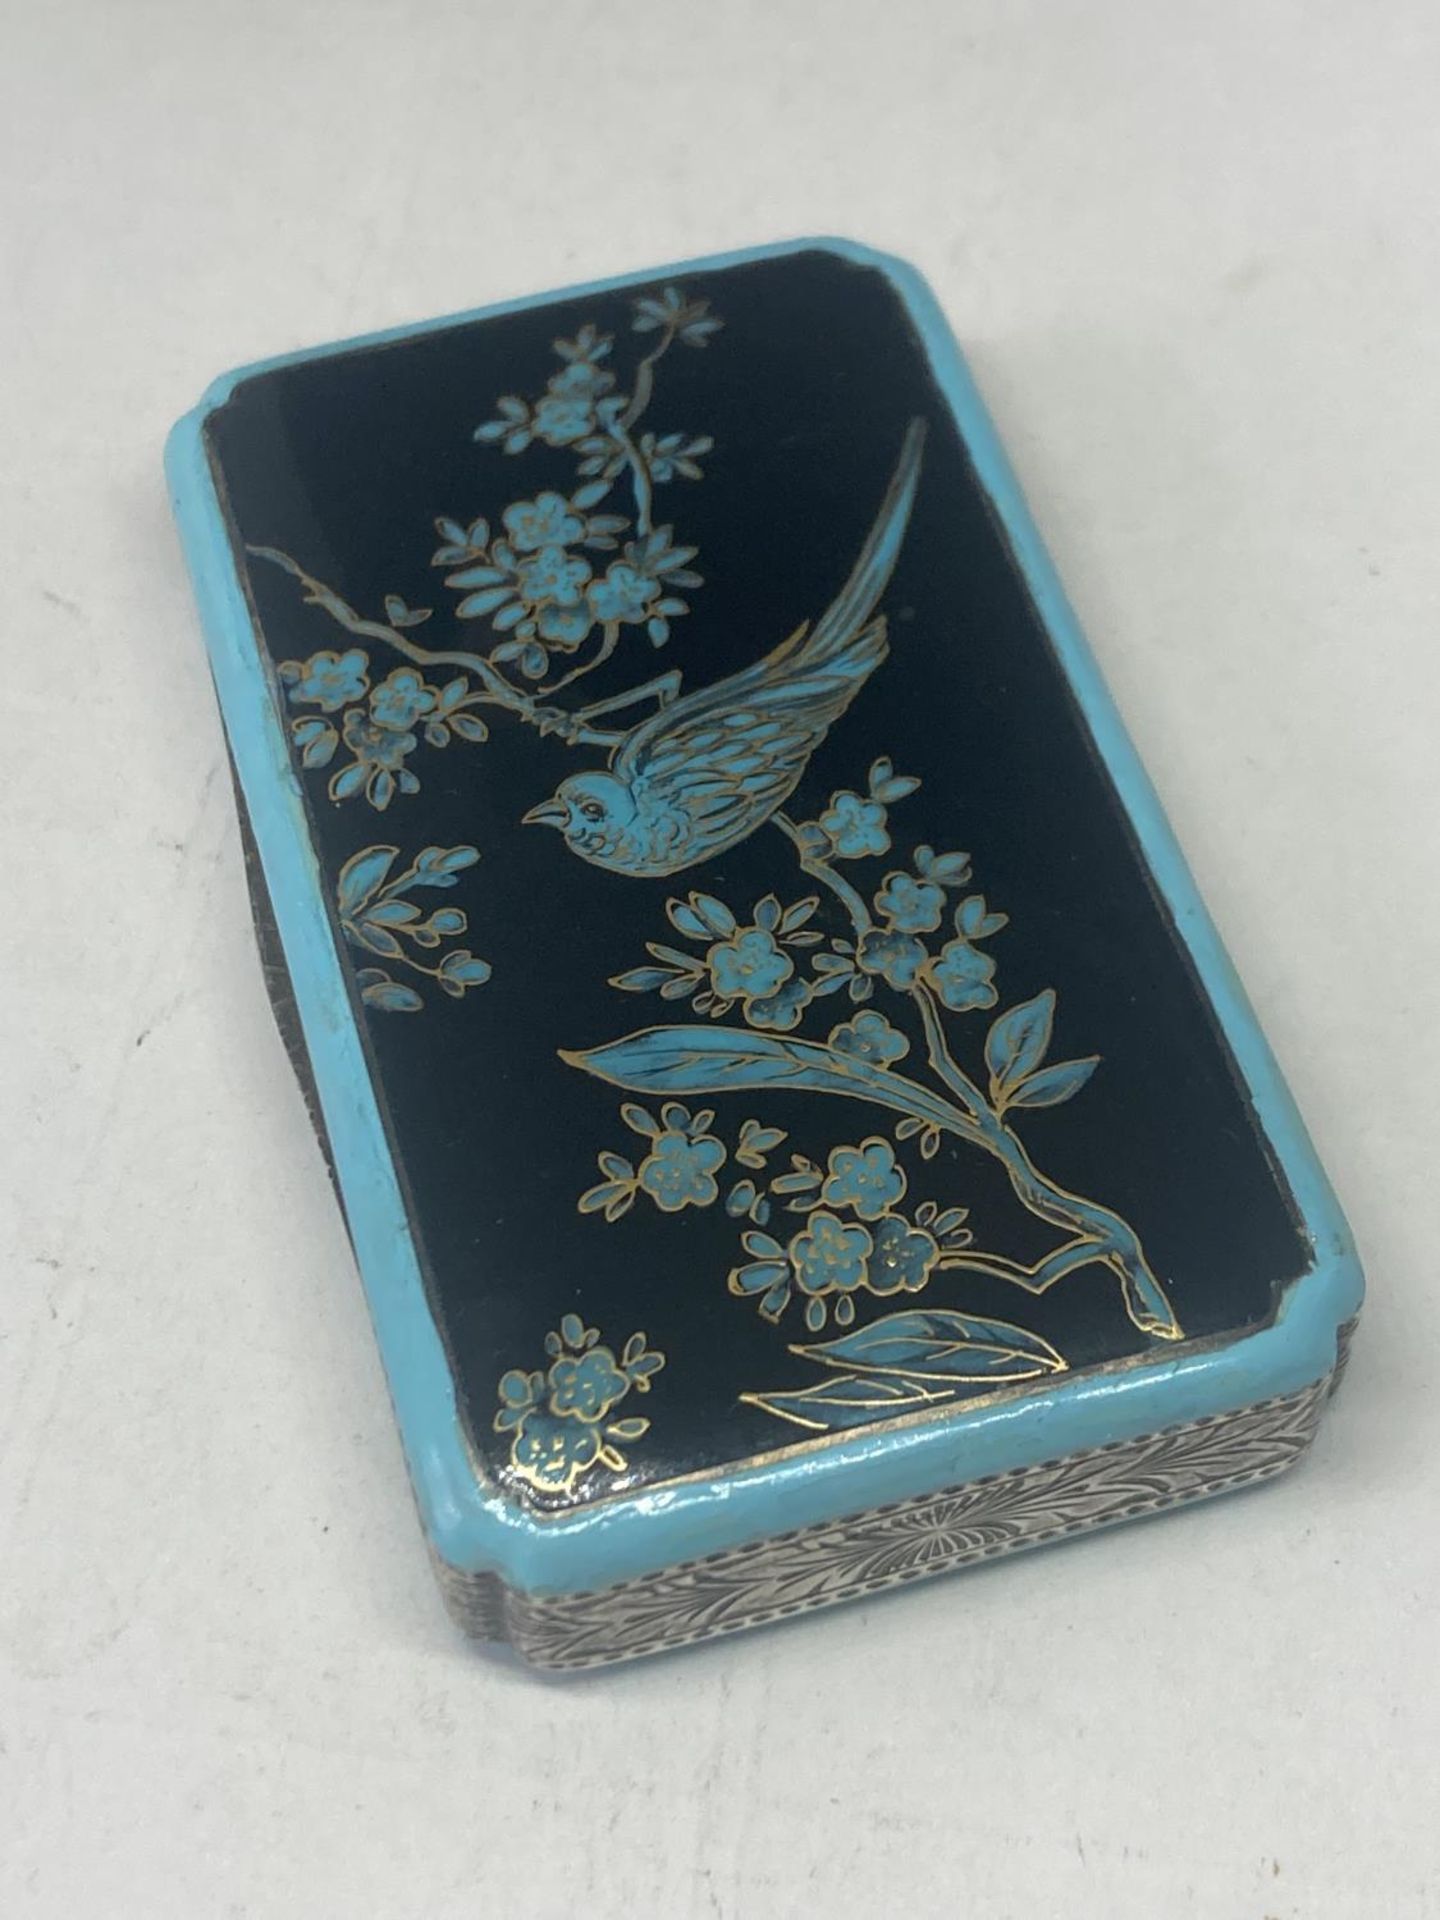 A SILVER AND ENAMEL TRINKET BOX WITH A TURQUOISE BLUE AND BLACK ORIENTAL BIRD DECORATION - Image 2 of 8